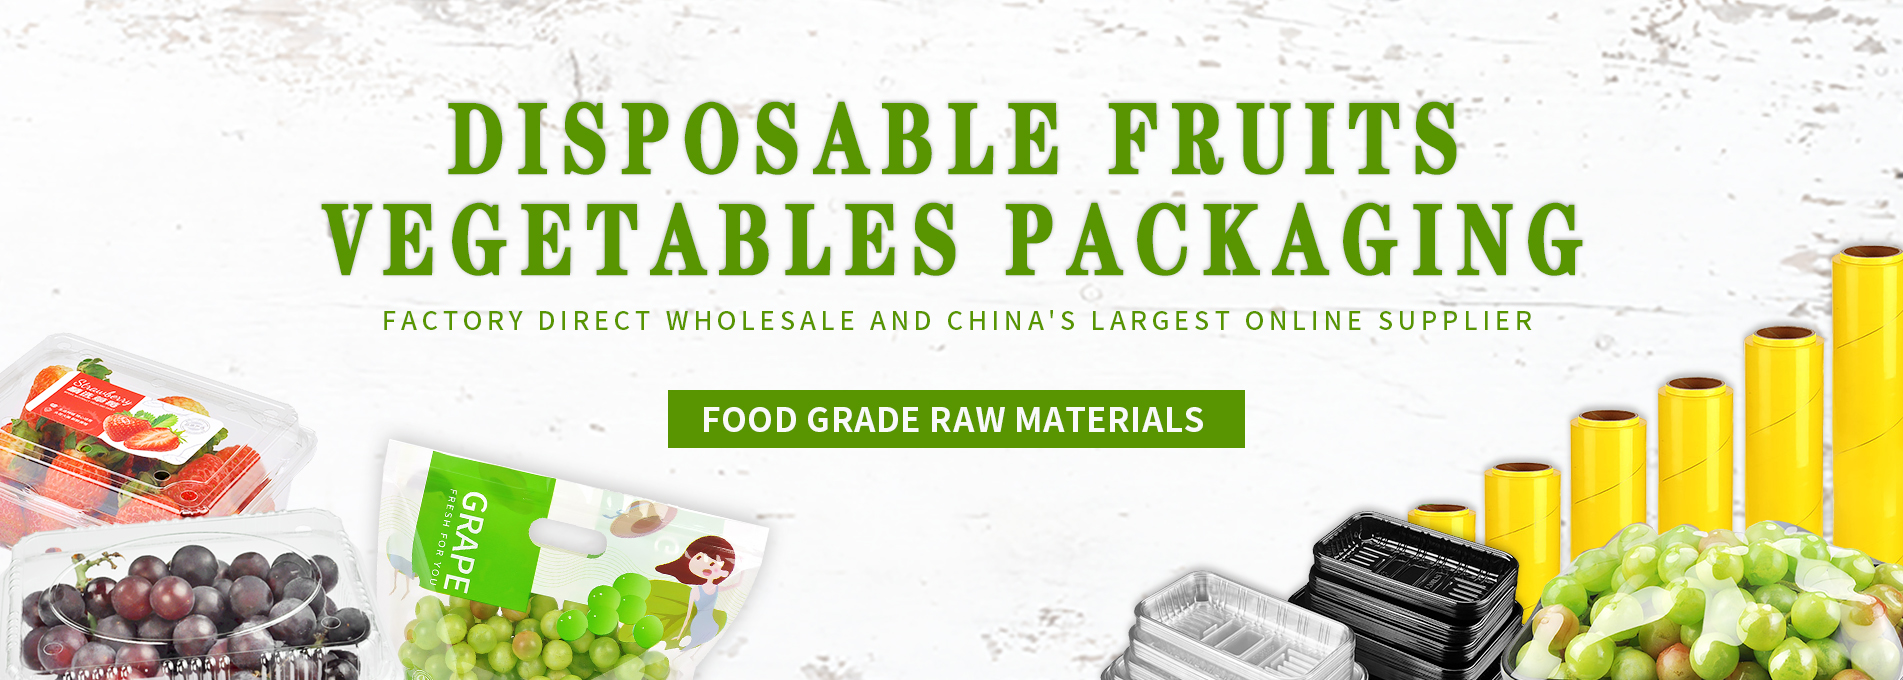 Disposable Fruits Vegetables Packaging